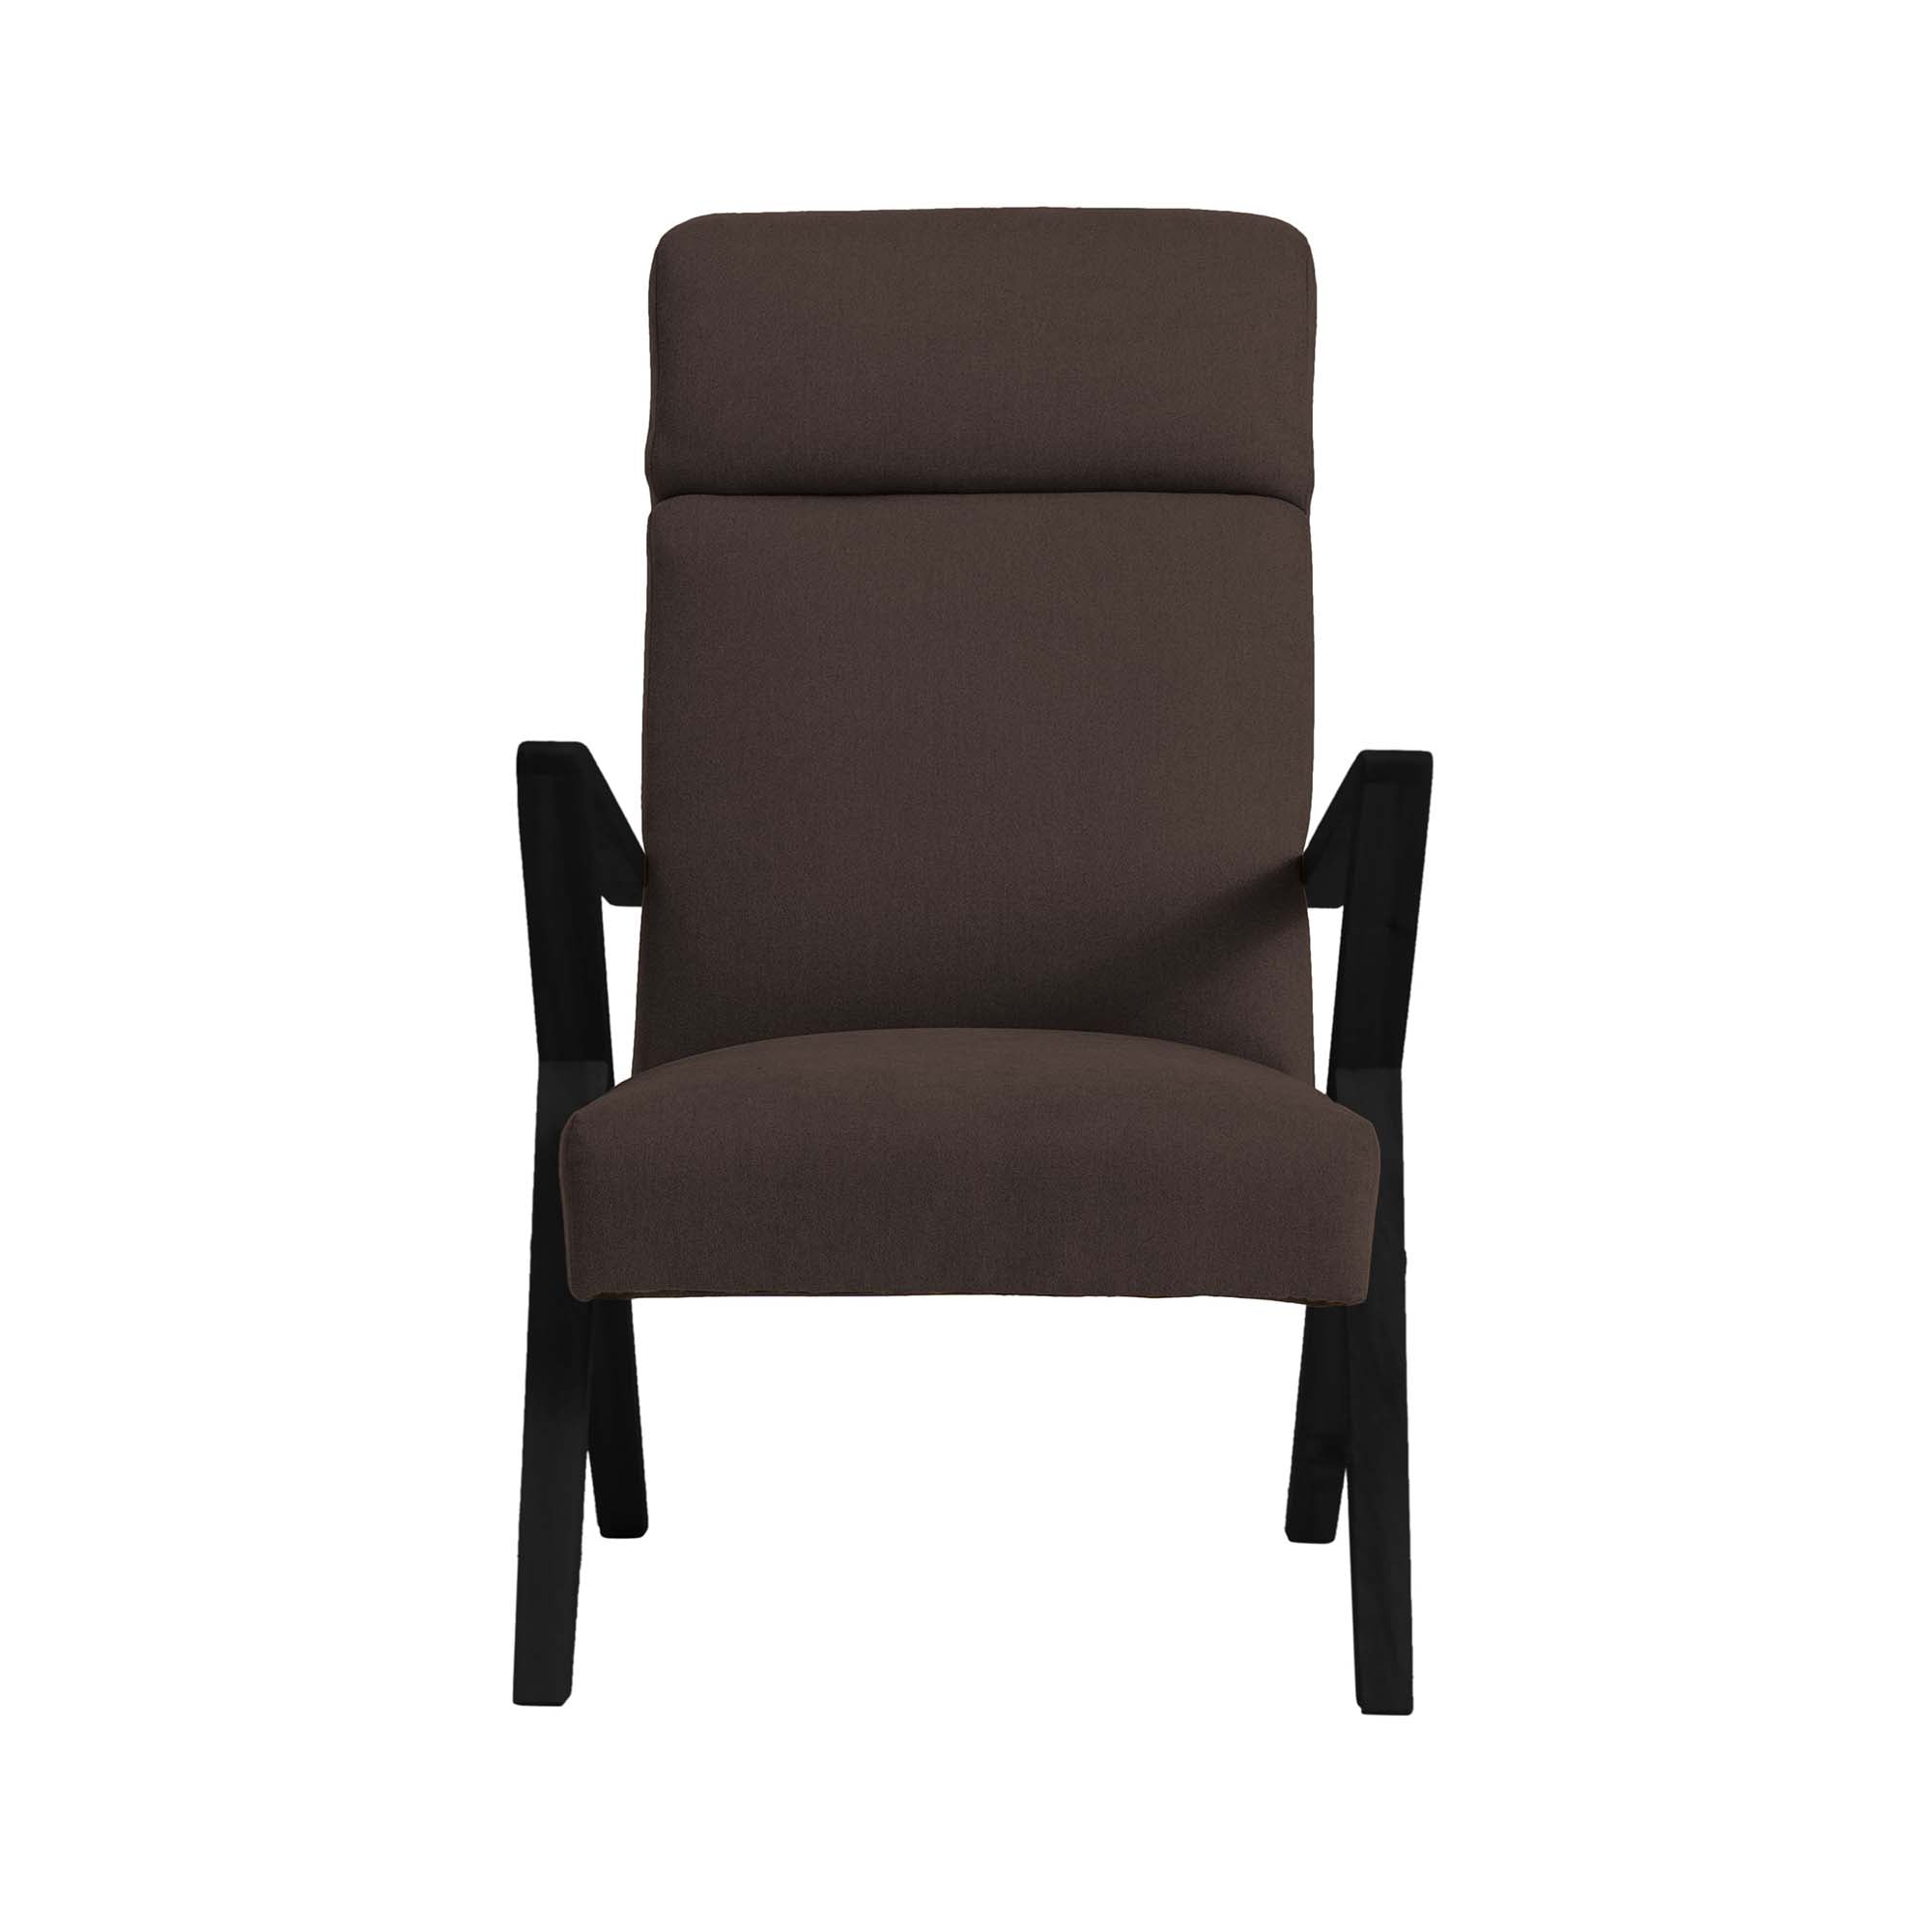 Lounge Chair, Beech Wood Frame, Black Lacquered brown fabric, front view